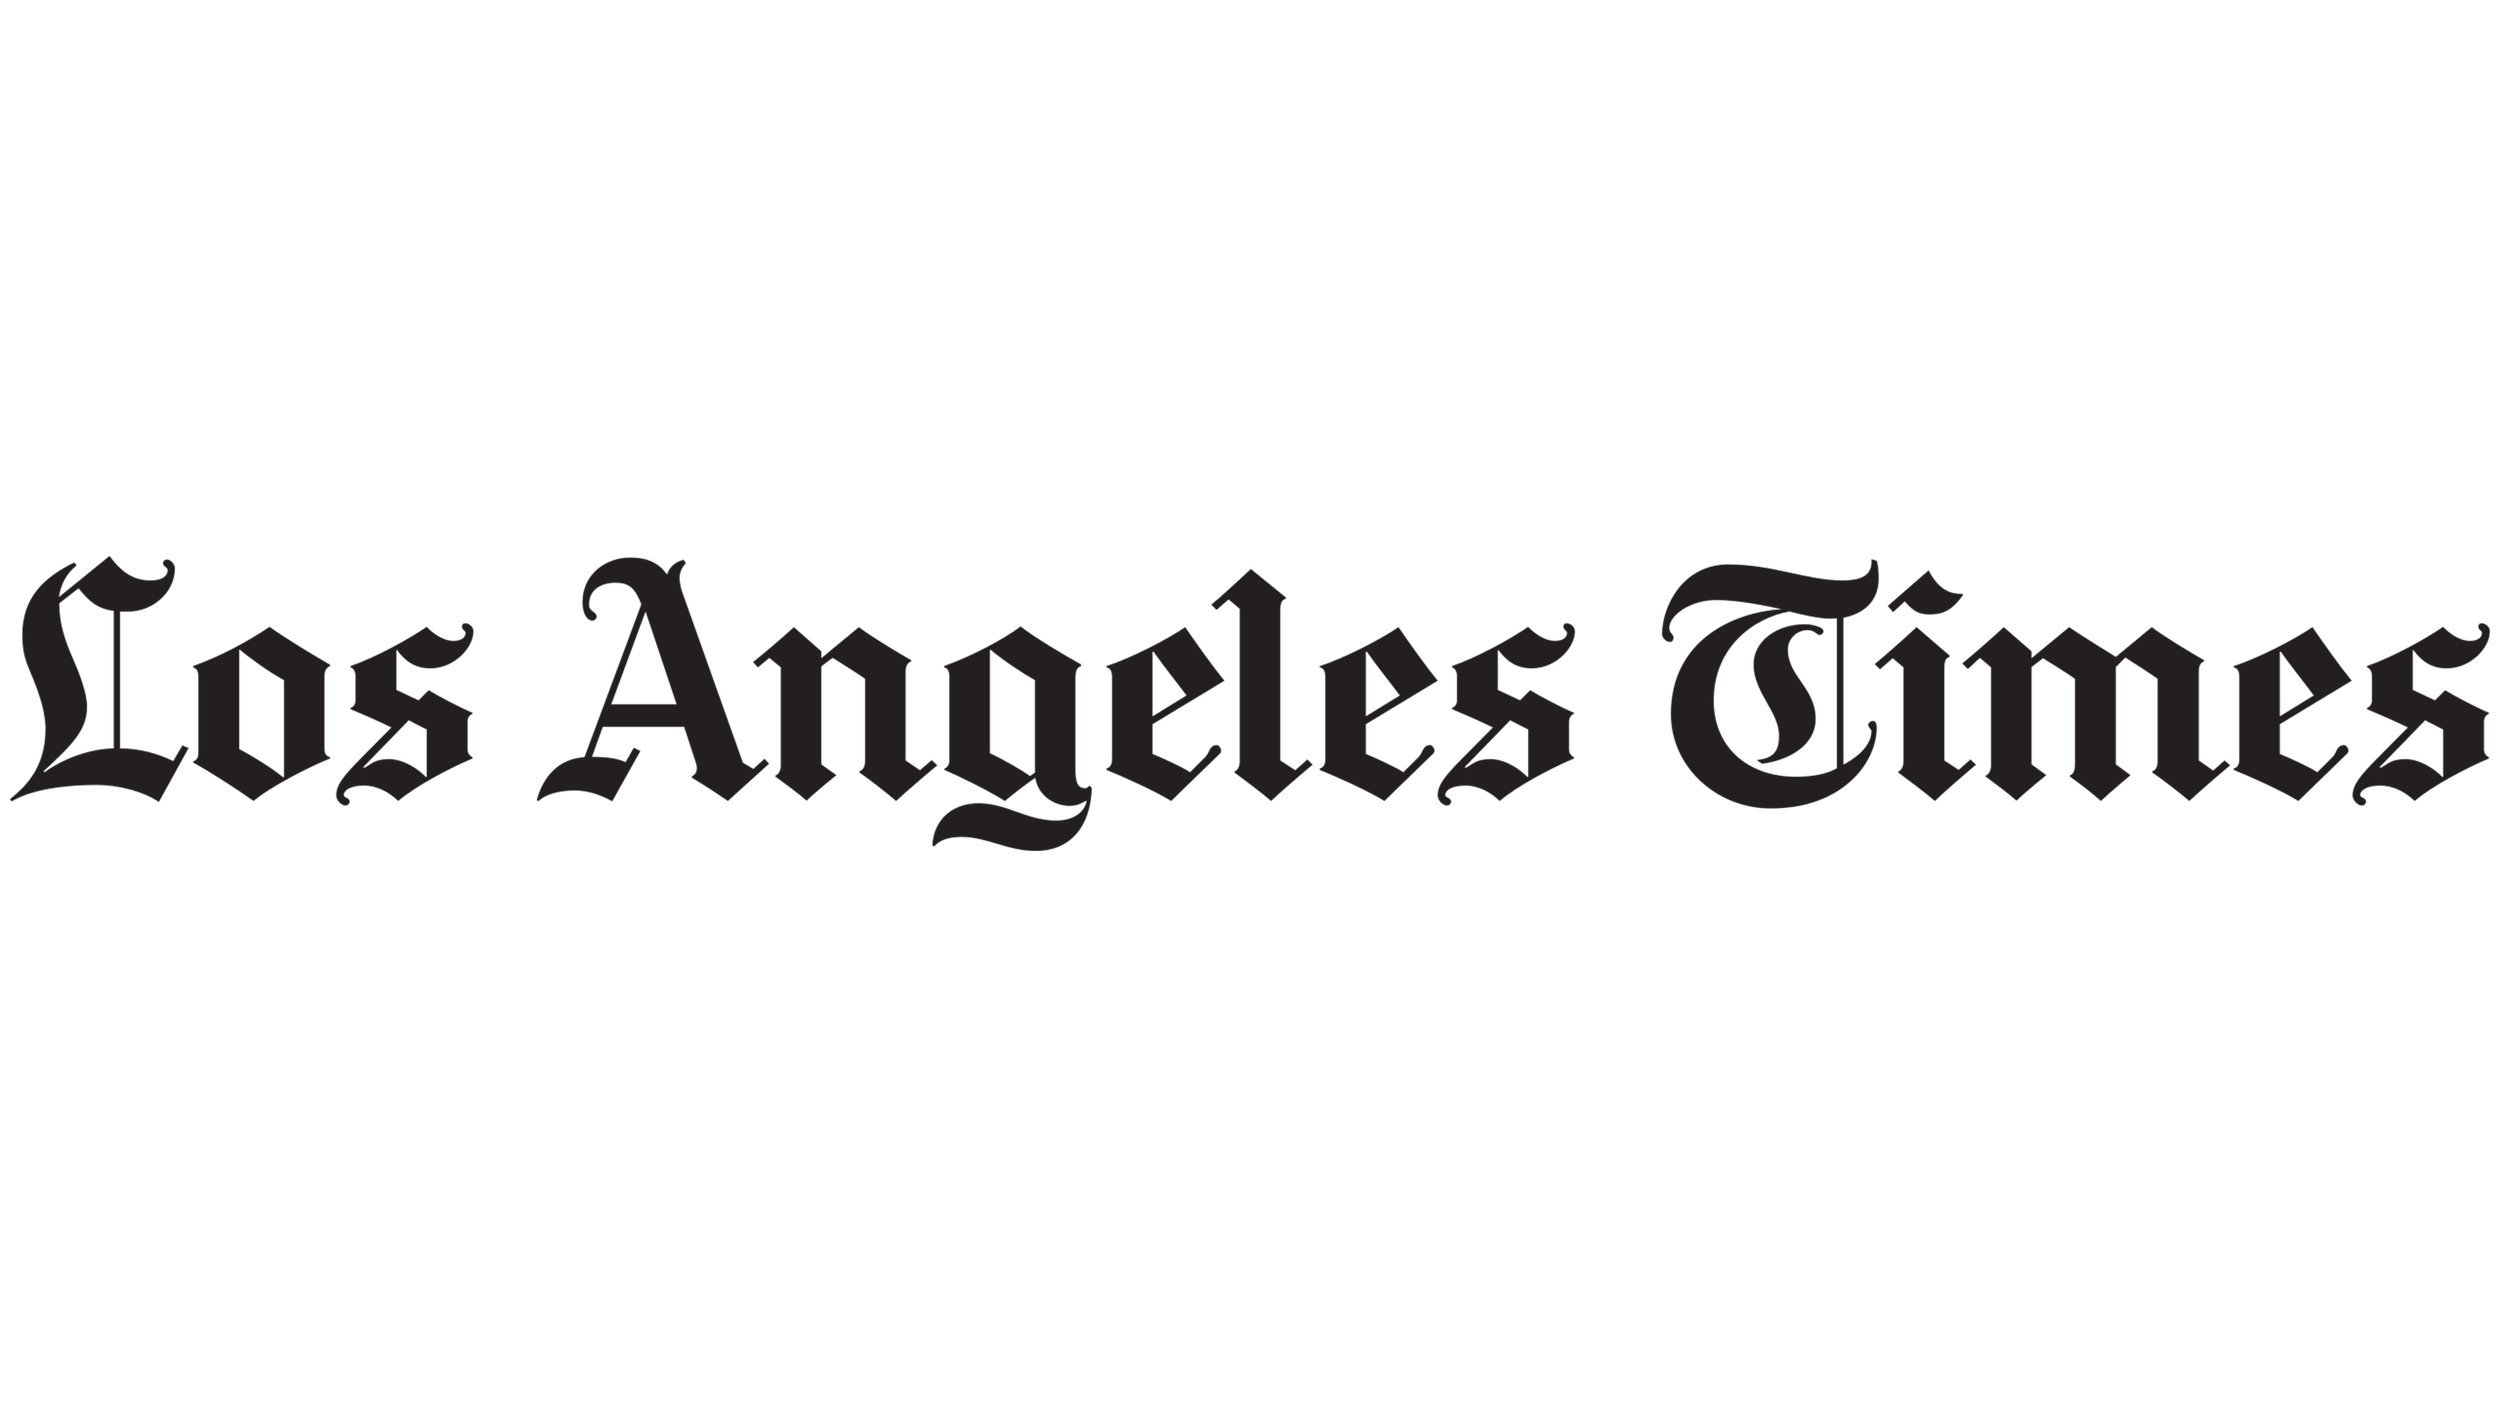 Los_Angeles_Times_logo.svg.png